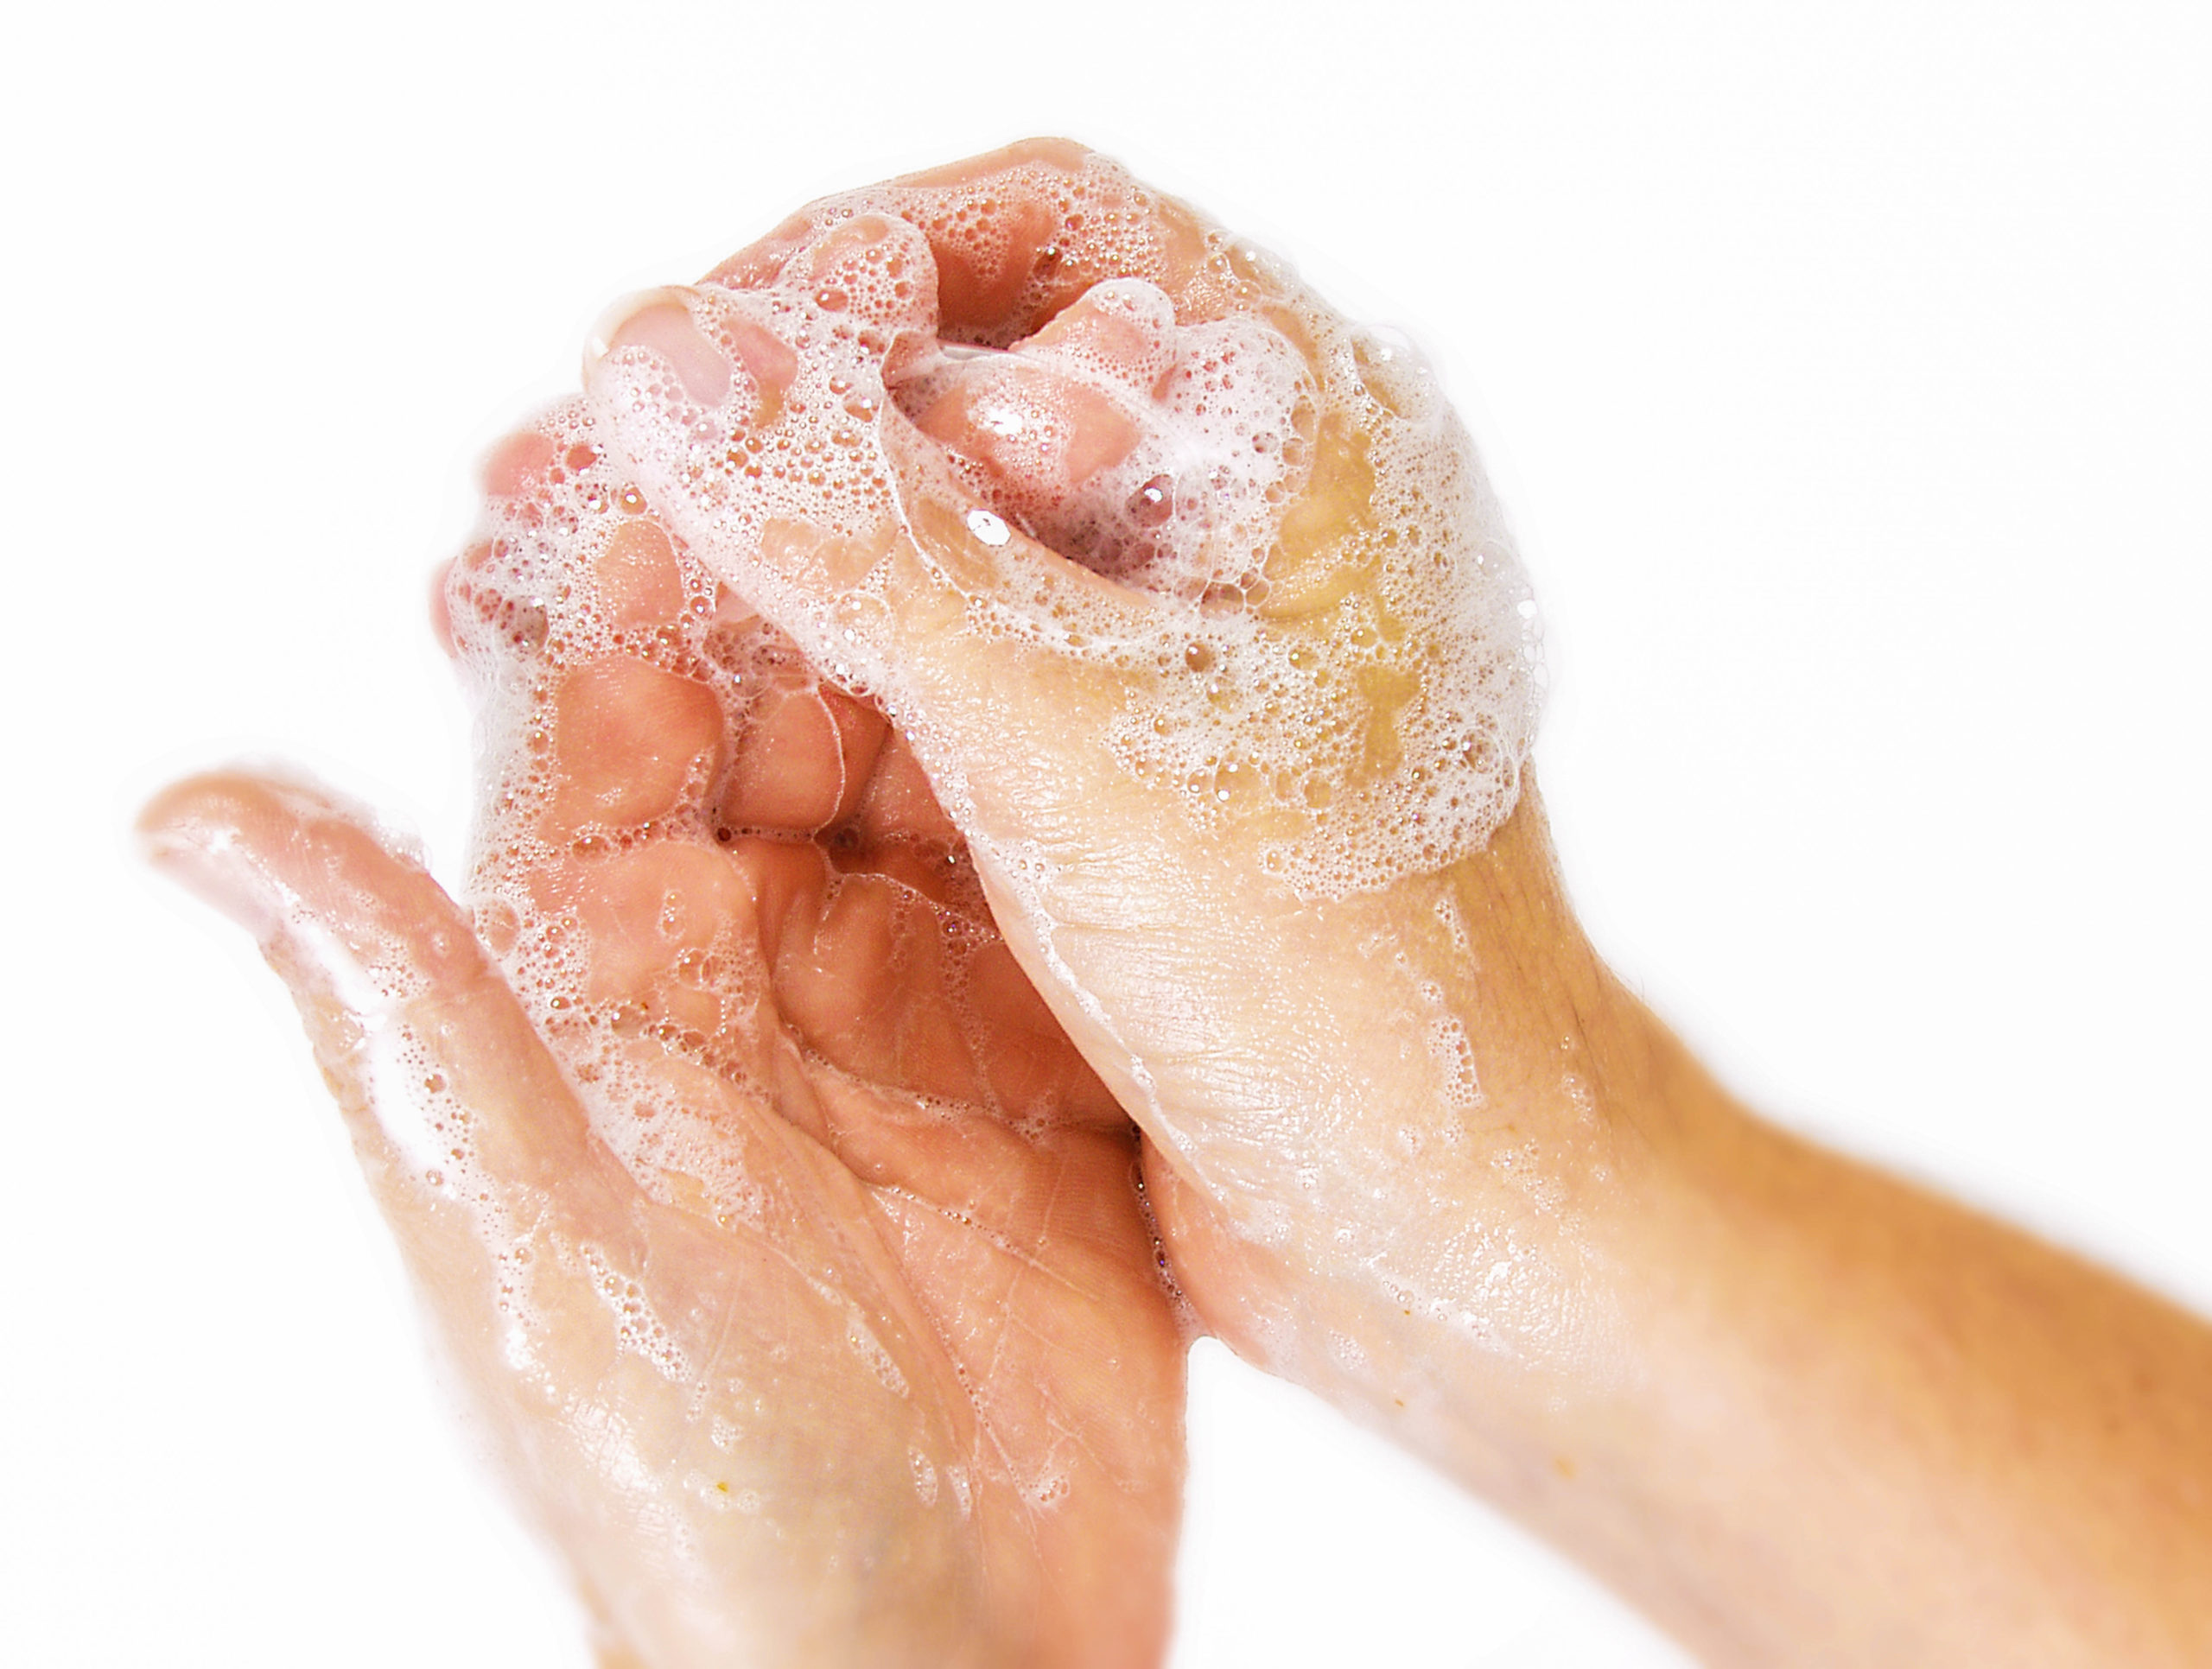 When to use soap and water, and when to use hand sanitizer - The CDC notes that preventing the spread of sickness through handwashing is most effective when people know which method to use when cleaning their hands. #HandWashing